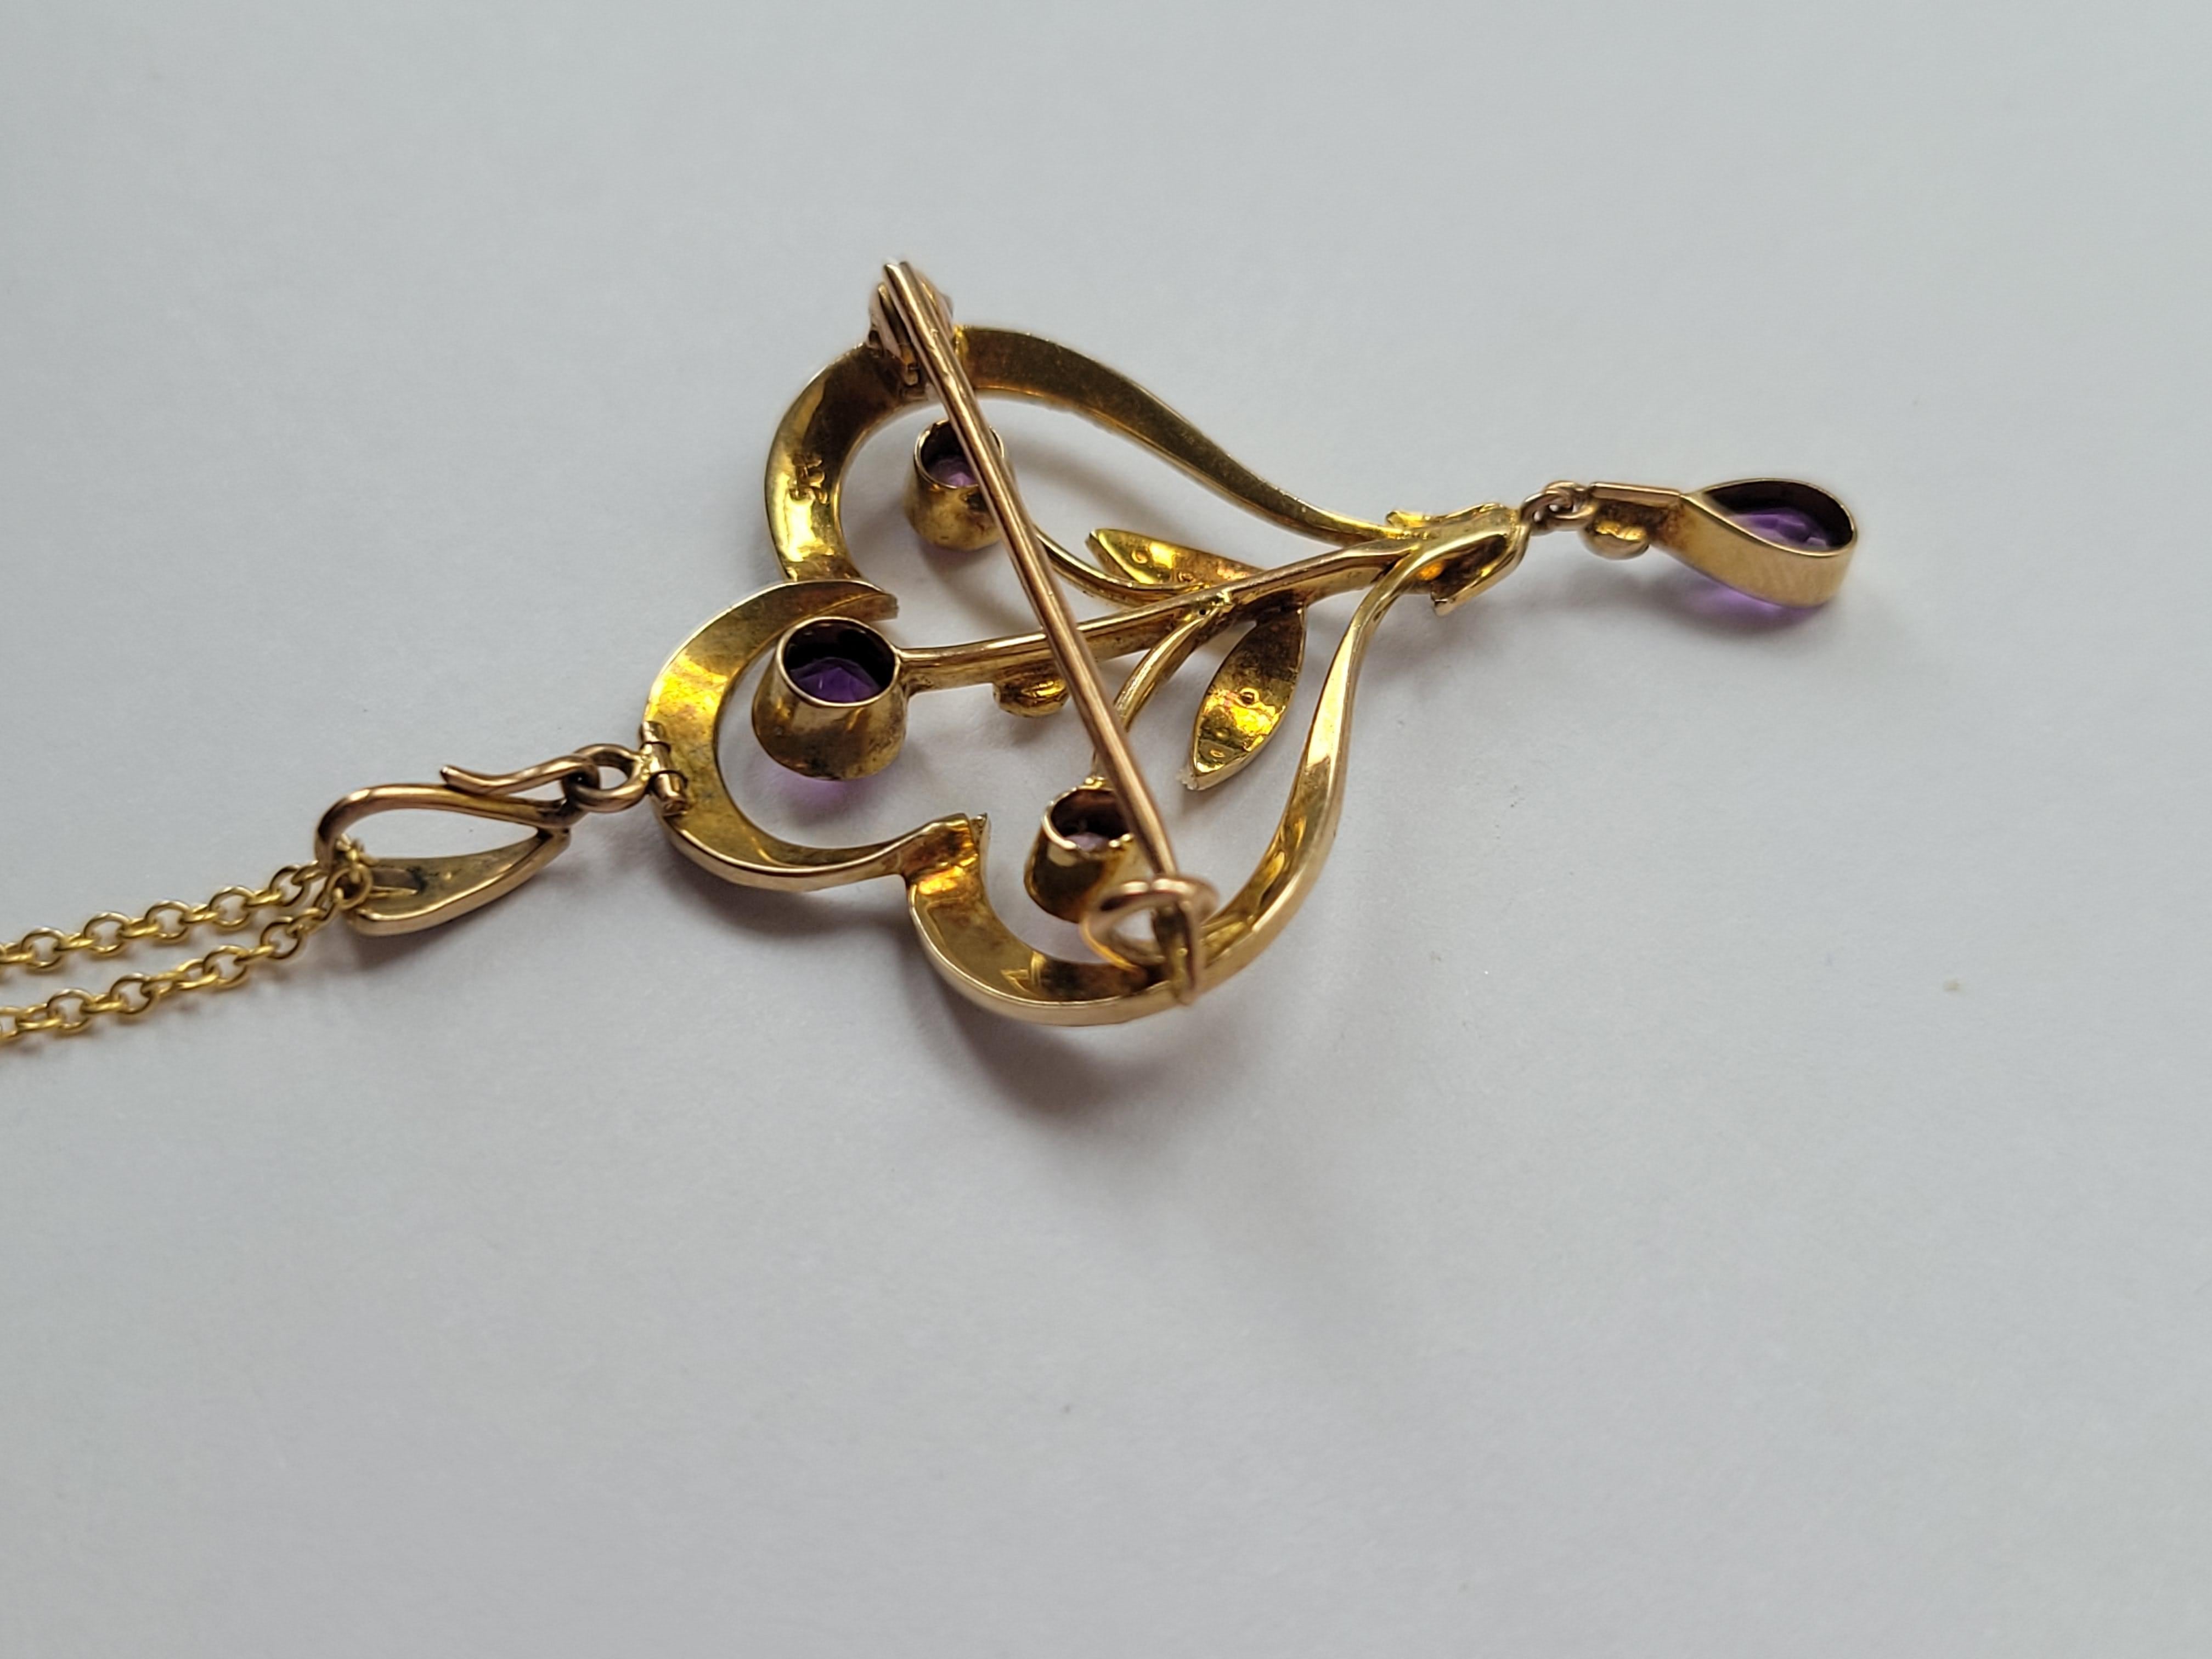 Antique Edwardian Amethyst Pearl Gold Brooch Pendant Necklace For Sale 2